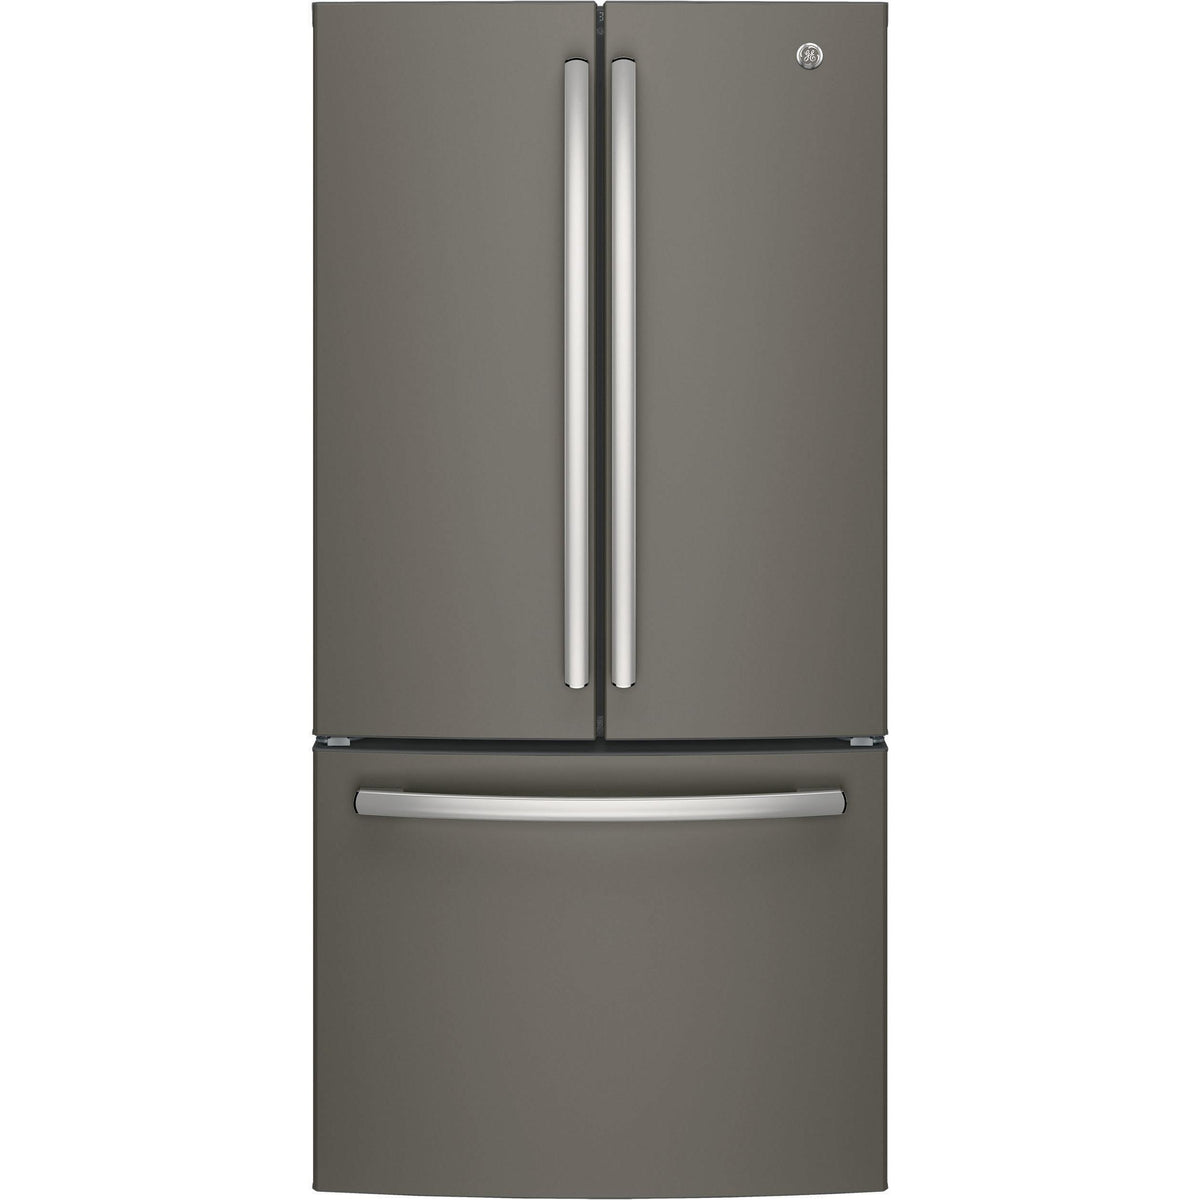 33-inch, 18.6 cu. ft. Counter-Depth French-Door Refrigerator GWE19JMLES IMAGE 1